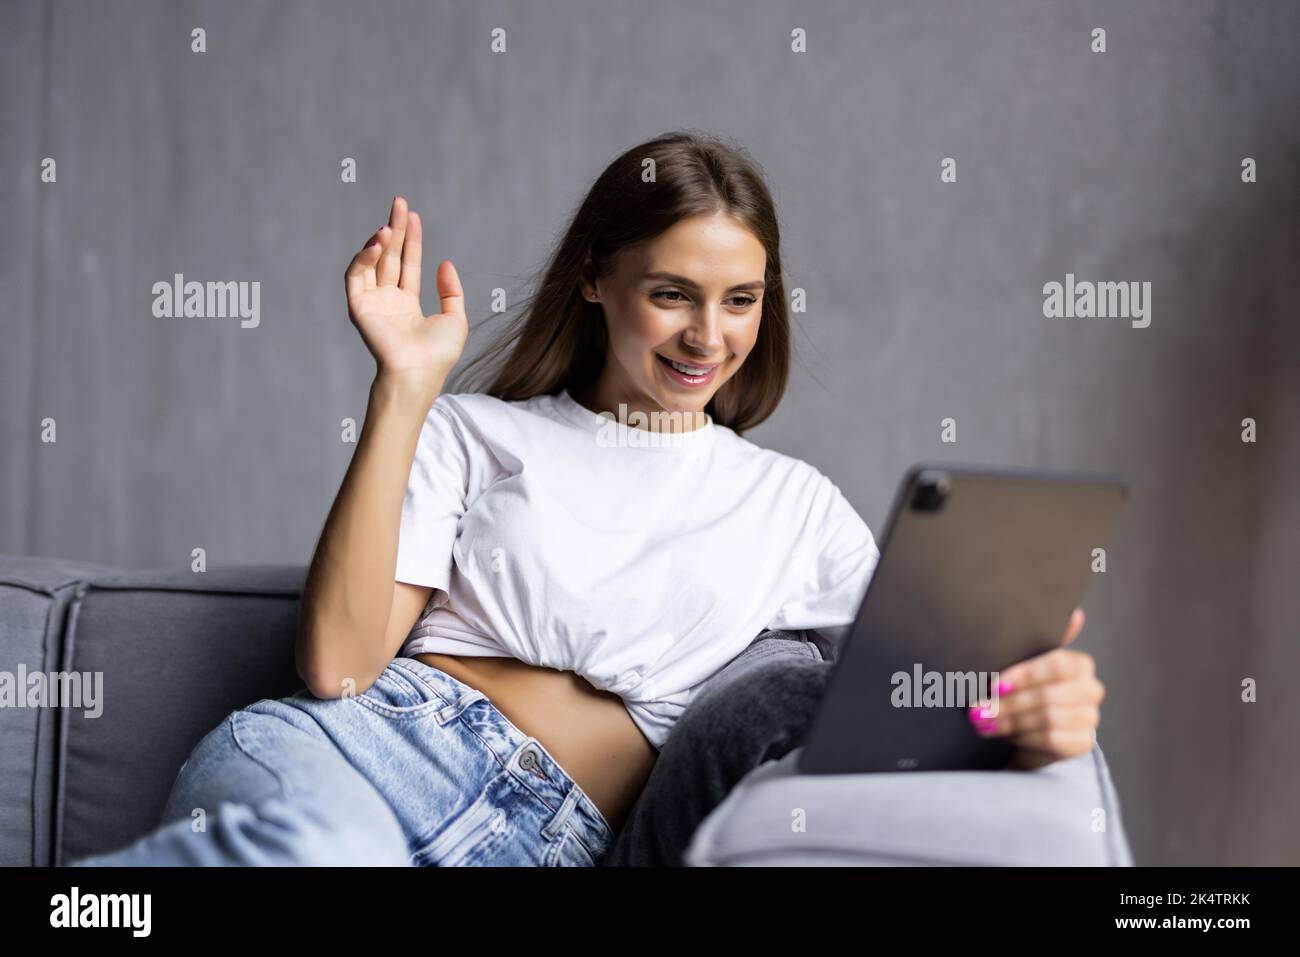 Gorgeous smiling caucasian woman sitting on sofa and using tablet for video call and waving. Living room interior. Stock Photo